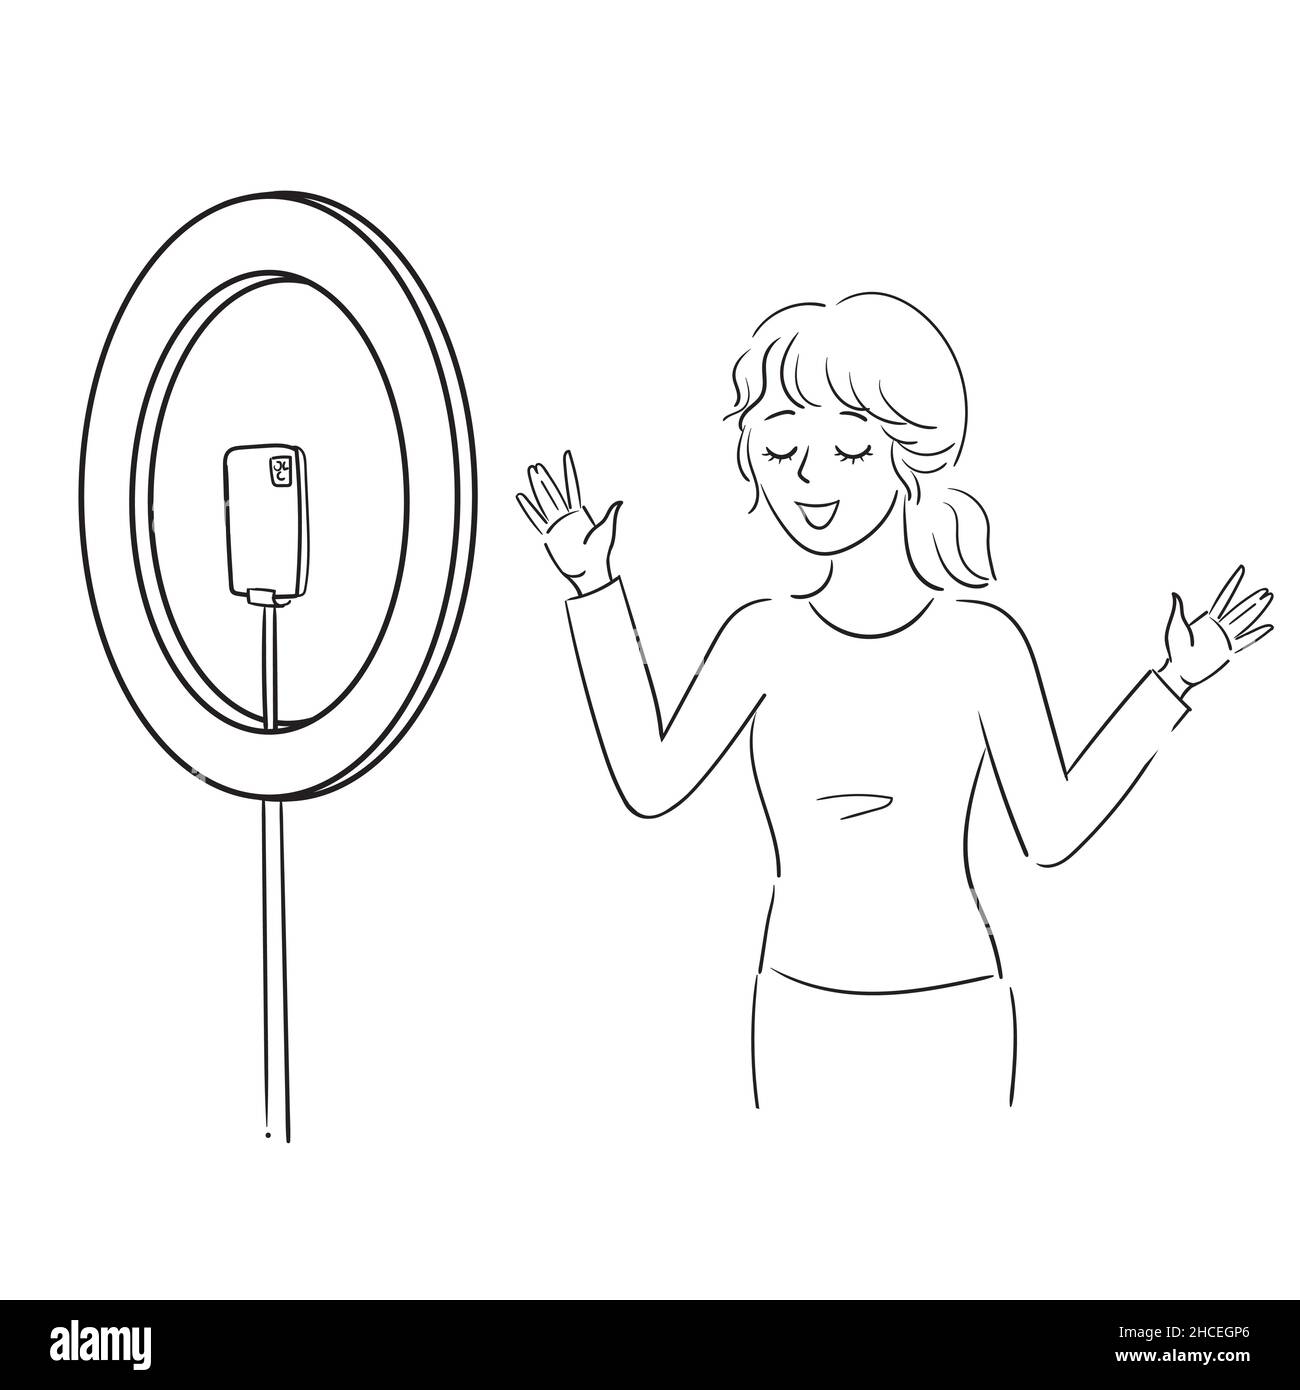 Sketch A cute woman records a video on a teolephone. Selfie ring. Stock vector illustration isolated on white background. Podcast, social media Stock Vector